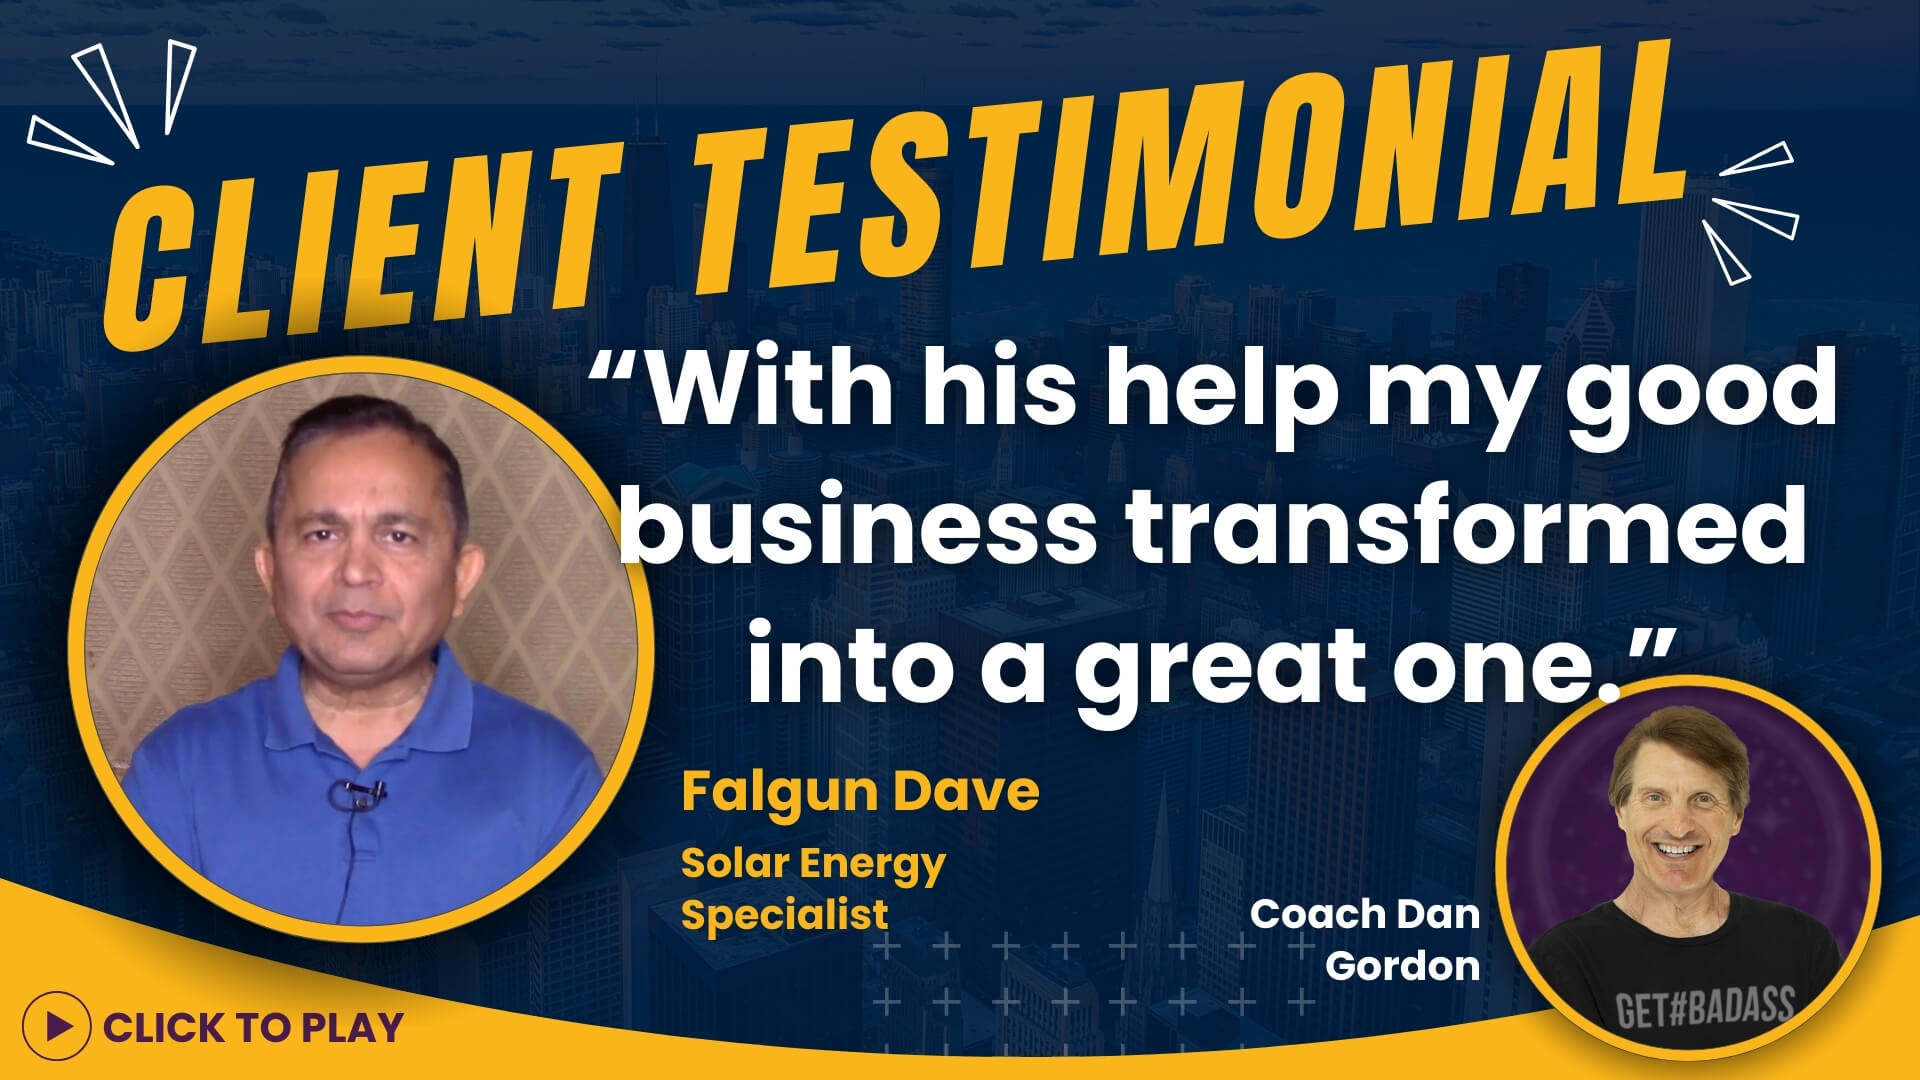 Falgun Dave, a Solar Energy Specialist, shares in his testimonial how Coach Dan Gordon transformed his good business into a great one, with a 'Click to Play' video testimonial.